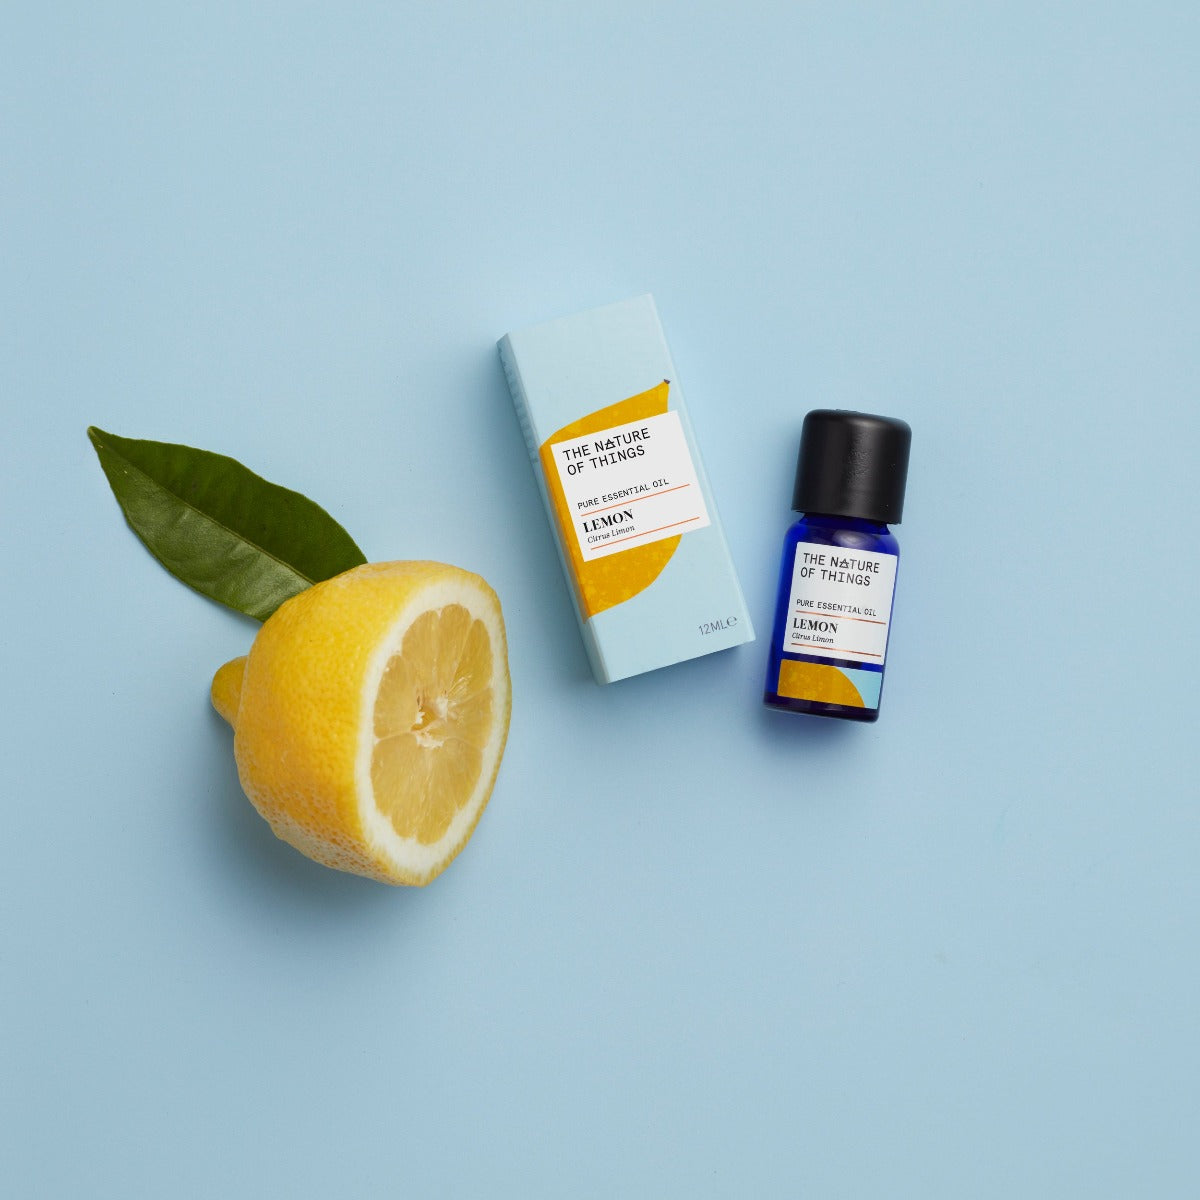 Organic Lemon Essential Oil from The Nature of Things